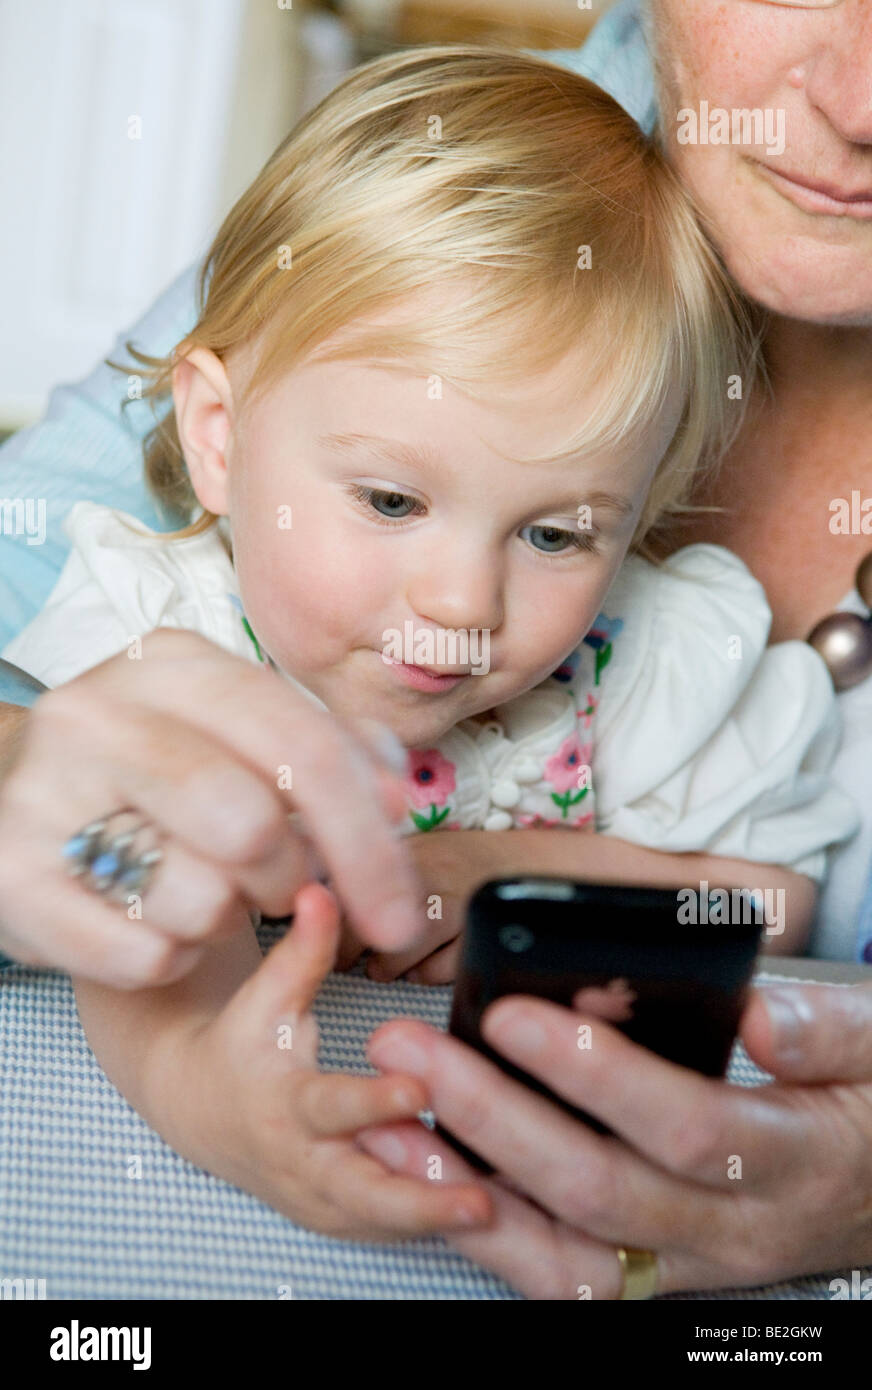 Baby girl, toddler, playing with an adult and their mobile phone, an iphone. Stock Photo